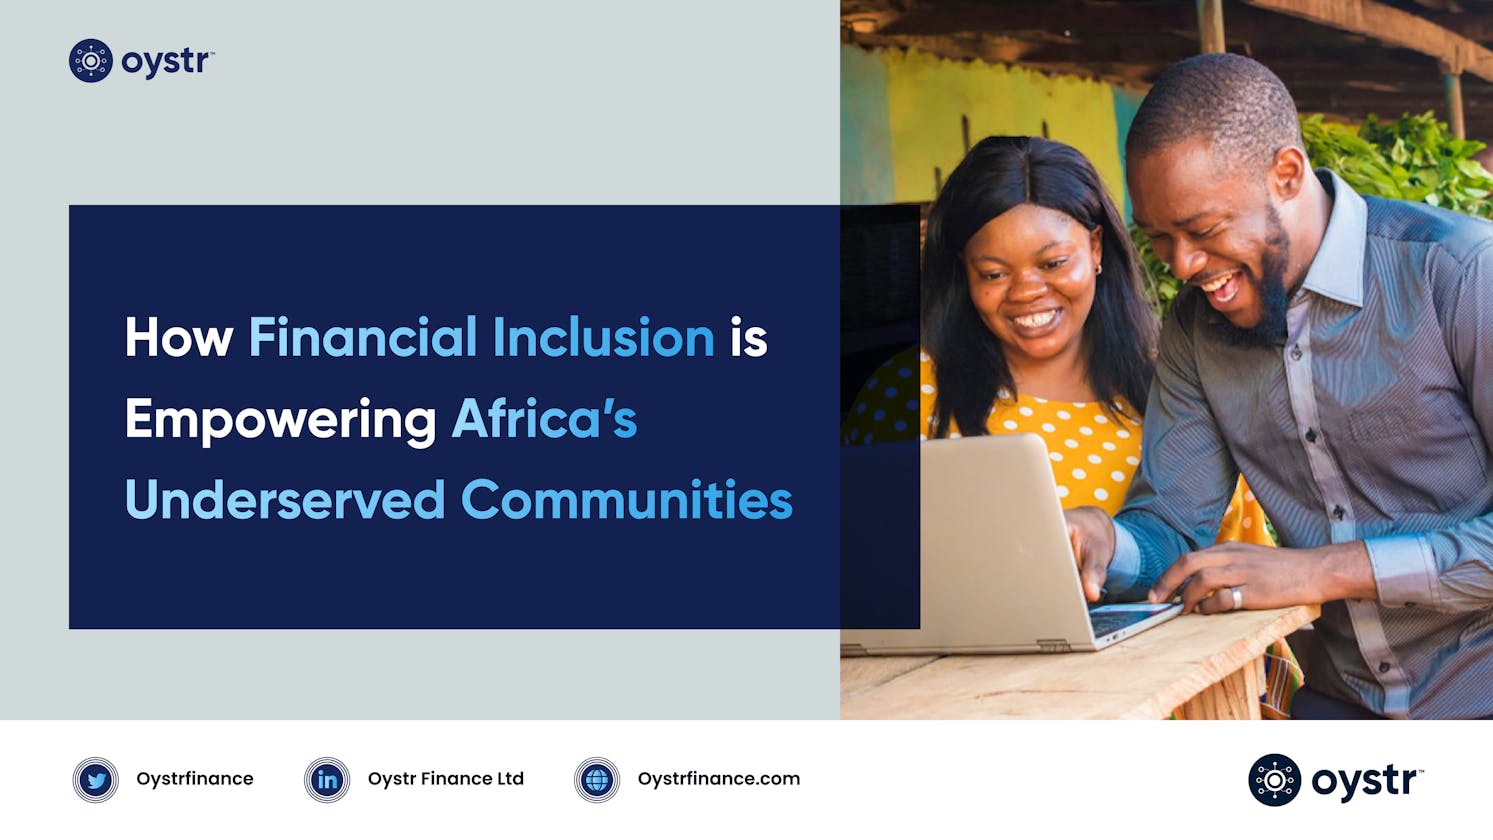 How Financial Inclusion is Empowering Africa's Underserved Communities